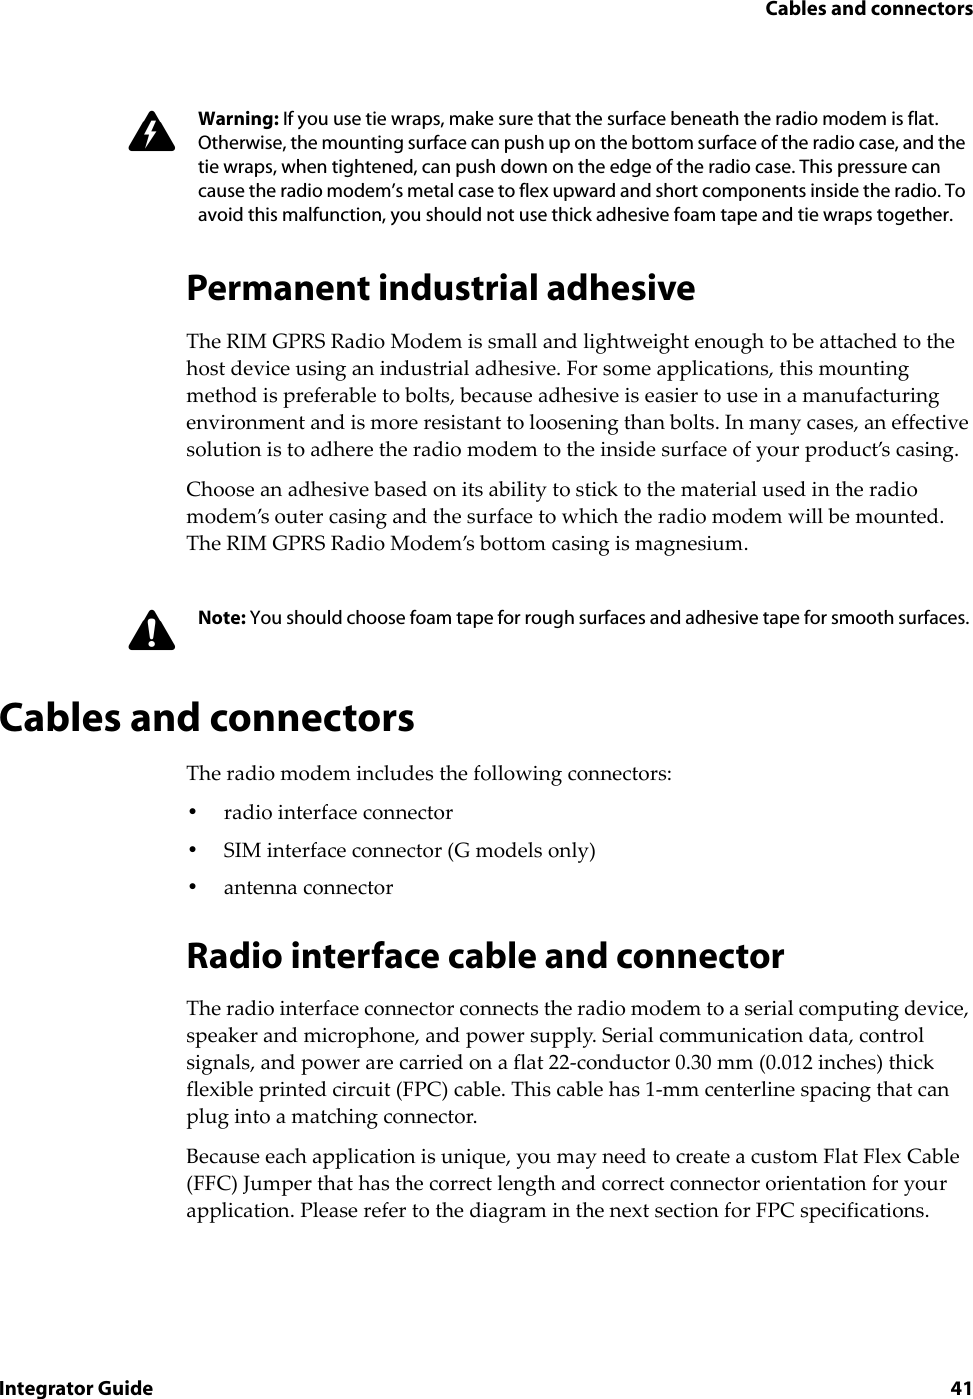 Cables and connectorsIntegrator Guide 41Permanent industrial adhesiveThe RIM GPRS Radio Modem is small and lightweight enough to be attached to the host device using an industrial adhesive. For some applications, this mounting method is preferable to bolts, because adhesive is easier to use in a manufacturing environment and is more resistant to loosening than bolts. In many cases, an effective solution is to adhere the radio modem to the inside surface of your product’s casing.Choose an adhesive based on its ability to stick to the material used in the radio modem’s outer casing and the surface to which the radio modem will be mounted. The RIM GPRS Radio Modem’s bottom casing is magnesium.Cables and connectorsThe radio modem includes the following connectors:•radio interface connector•SIM interface connector (G models only)•antenna connector Radio interface cable and connectorThe radio interface connector connects the radio modem to a serial computing device, speaker and microphone, and power supply. Serial communication data, control signals, and power are carried on a flat 22-conductor 0.30 mm (0.012 inches) thick flexible printed circuit (FPC) cable. This cable has 1-mm centerline spacing that can plug into a matching connector. Because each application is unique, you may need to create a custom Flat Flex Cable (FFC) Jumper that has the correct length and correct connector orientation for your application. Please refer to the diagram in the next section for FPC specifications.Warning: If you use tie wraps, make sure that the surface beneath the radio modem is flat. Otherwise, the mounting surface can push up on the bottom surface of the radio case, and the tie wraps, when tightened, can push down on the edge of the radio case. This pressure can cause the radio modem’s metal case to flex upward and short components inside the radio. To avoid this malfunction, you should not use thick adhesive foam tape and tie wraps together.Note: You should choose foam tape for rough surfaces and adhesive tape for smooth surfaces.